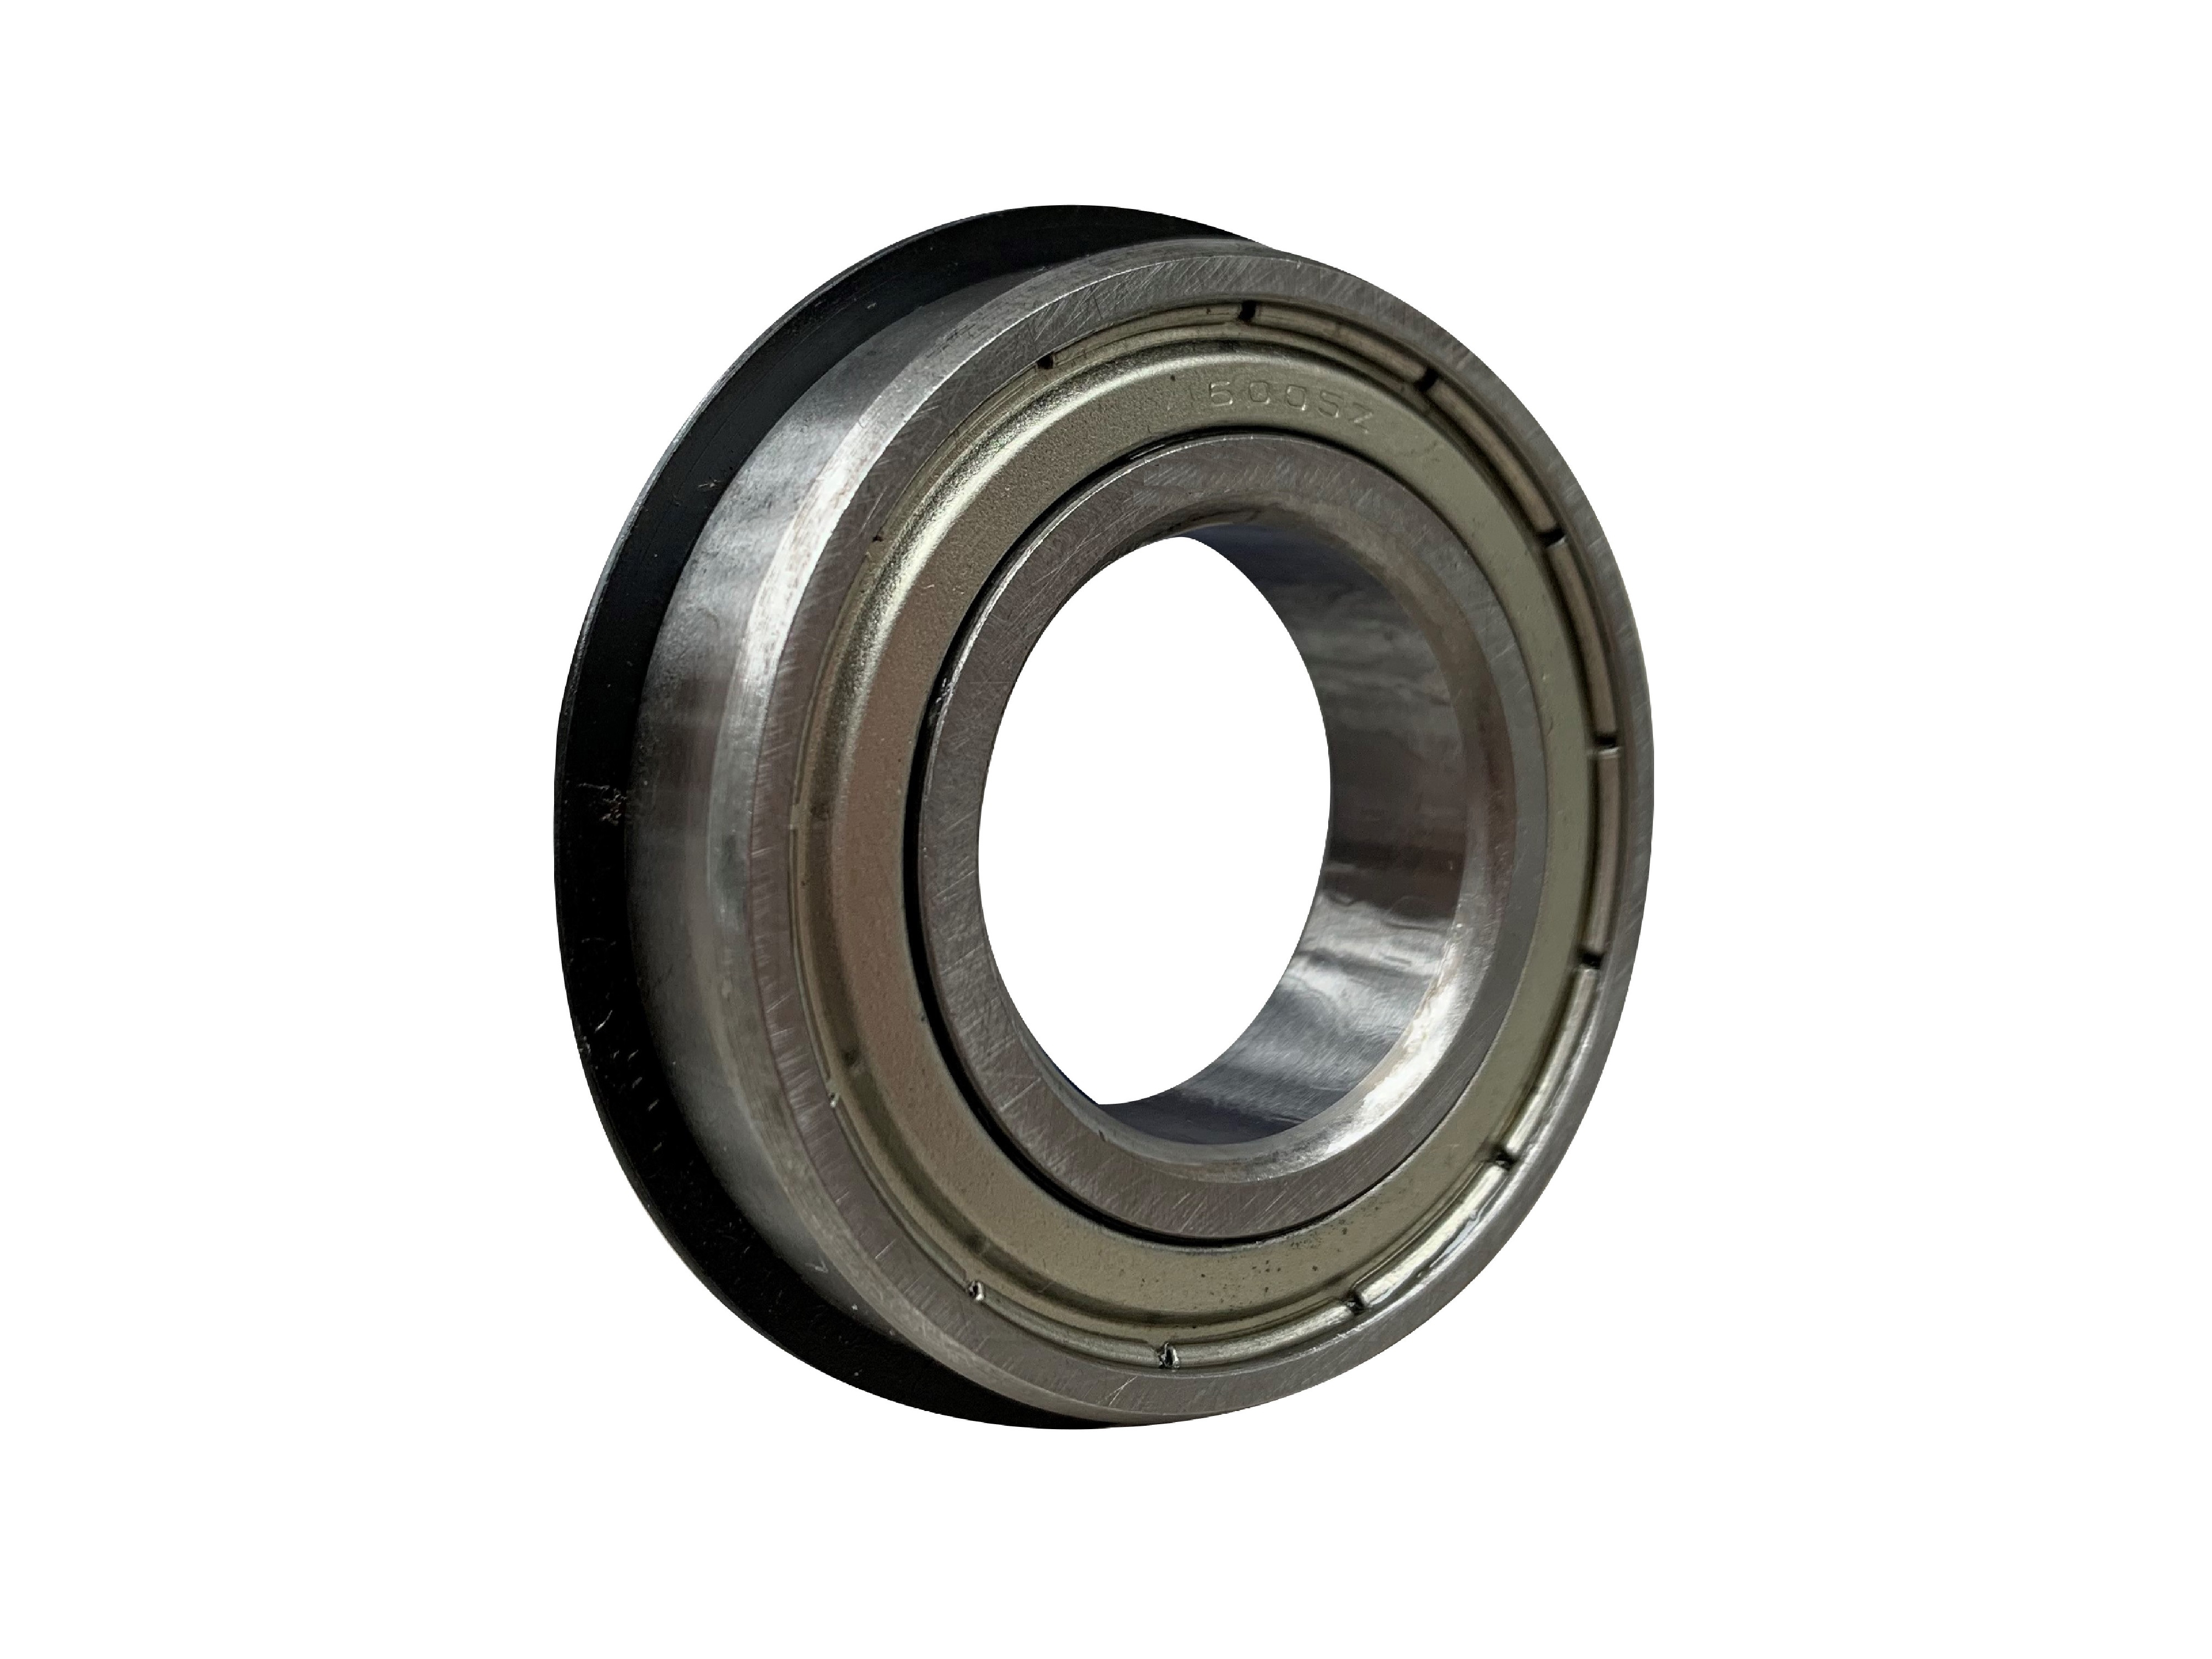 SKF 6202-2ZNR Shielded Ball Bearing With Snap Ring 15mm x 35mm x 11mm